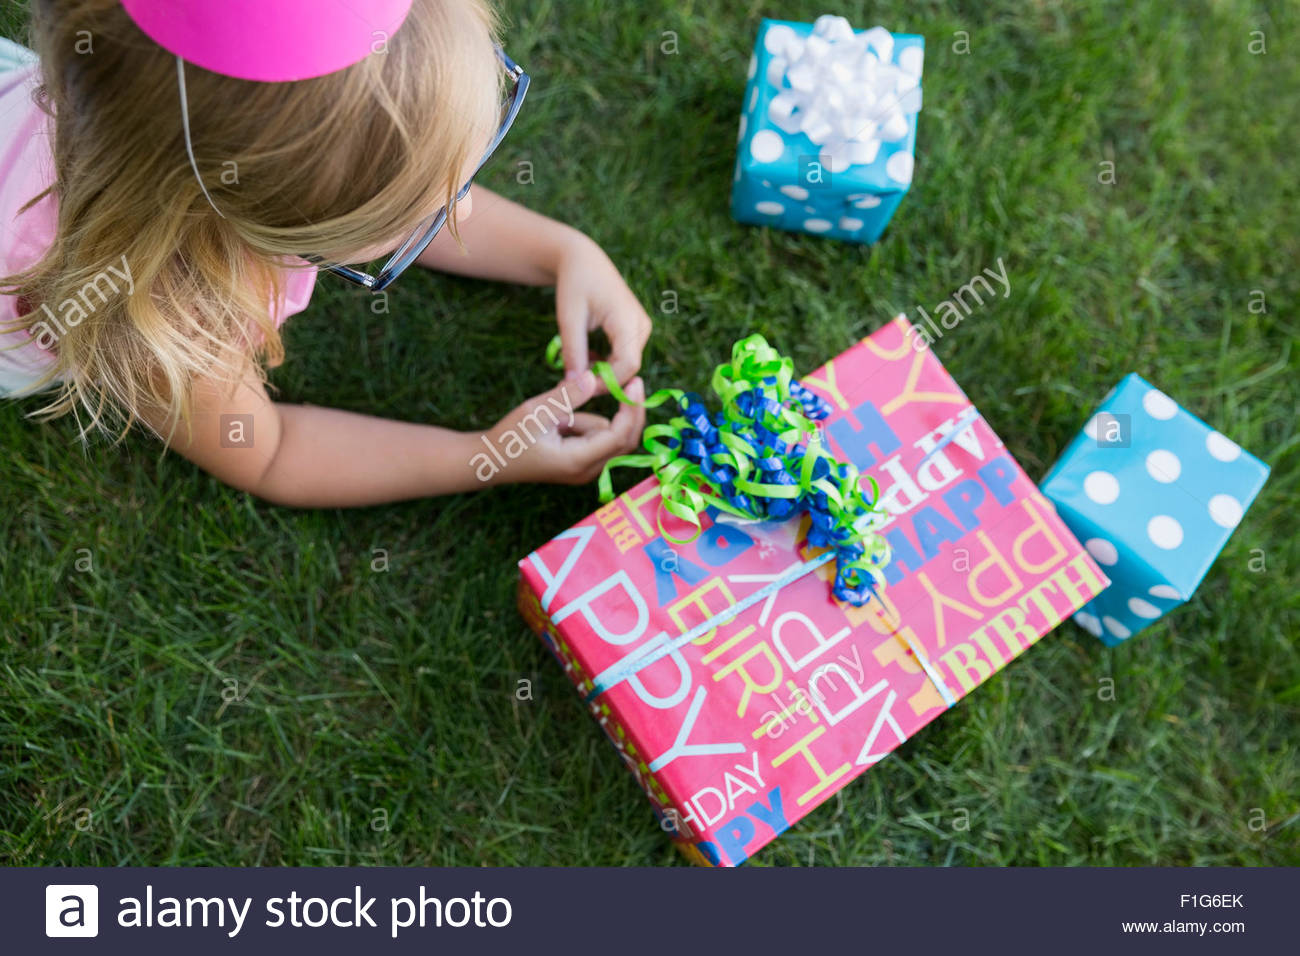 Vue aérienne girl with birthday gifts in grass Banque D'Images